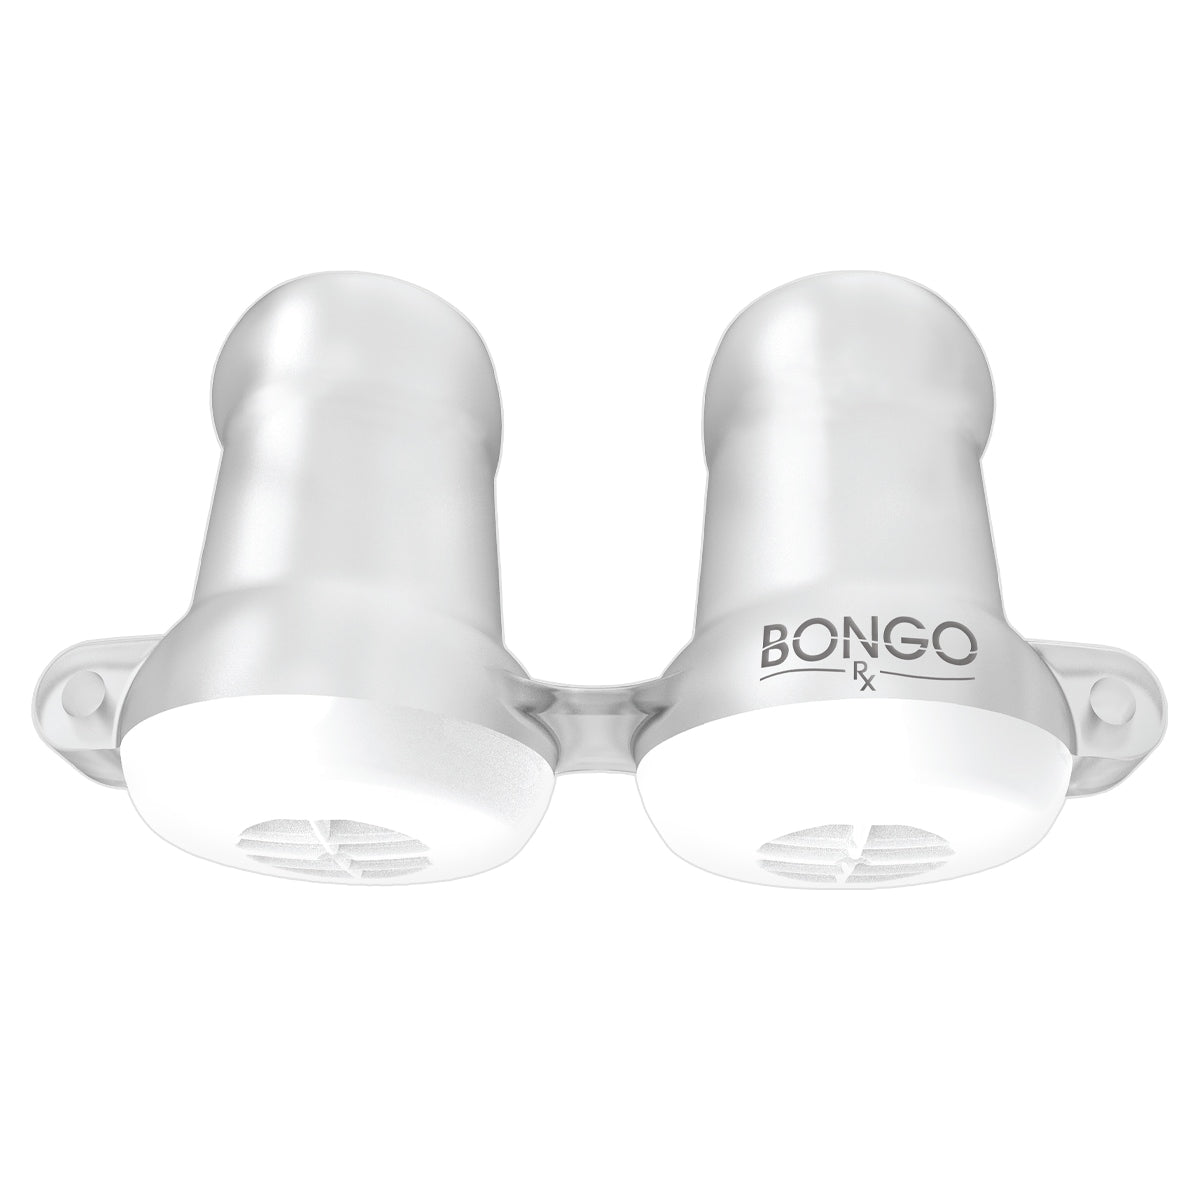 Bongo RX EPAP Device Replacement Insert with Headgear